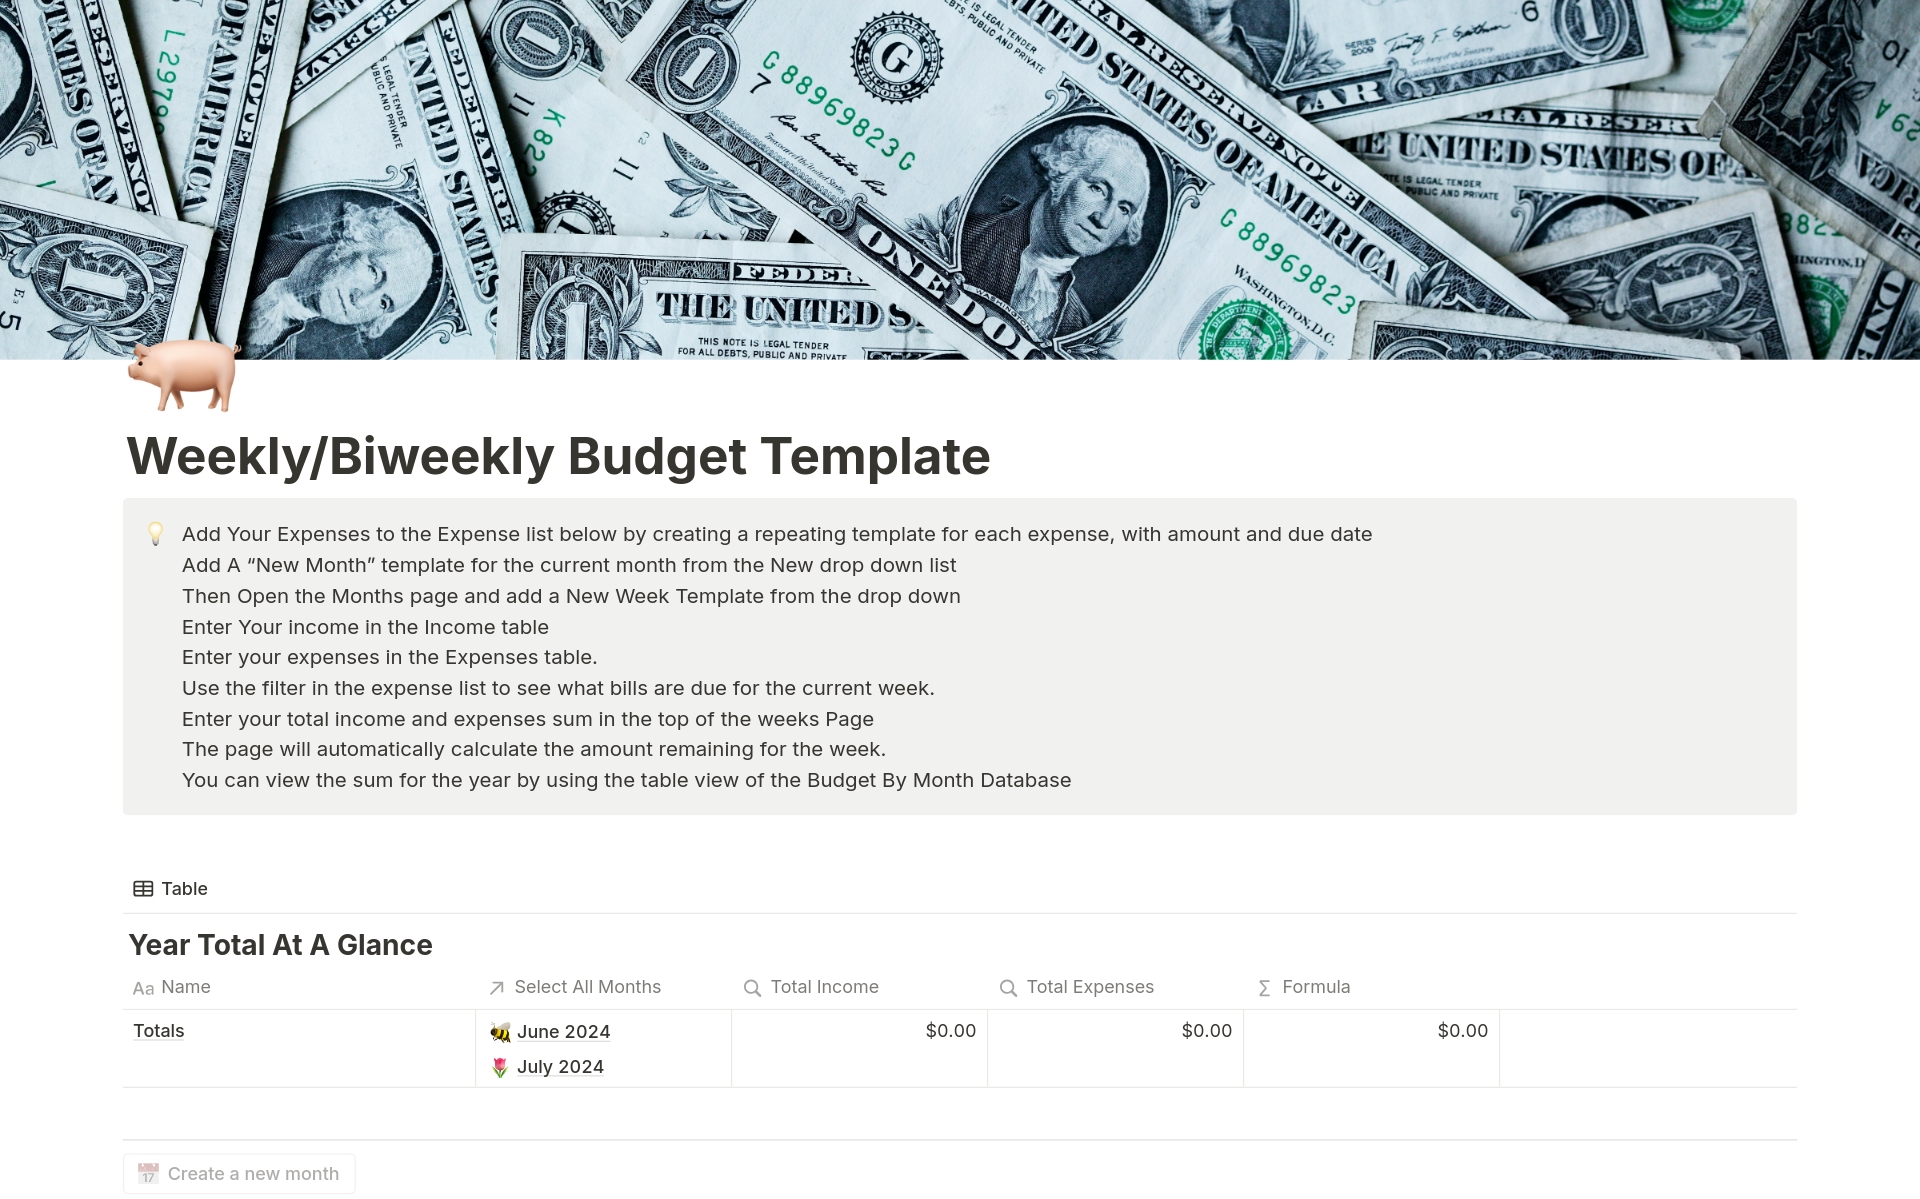 A template preview for Weekly/Biweekly Budget